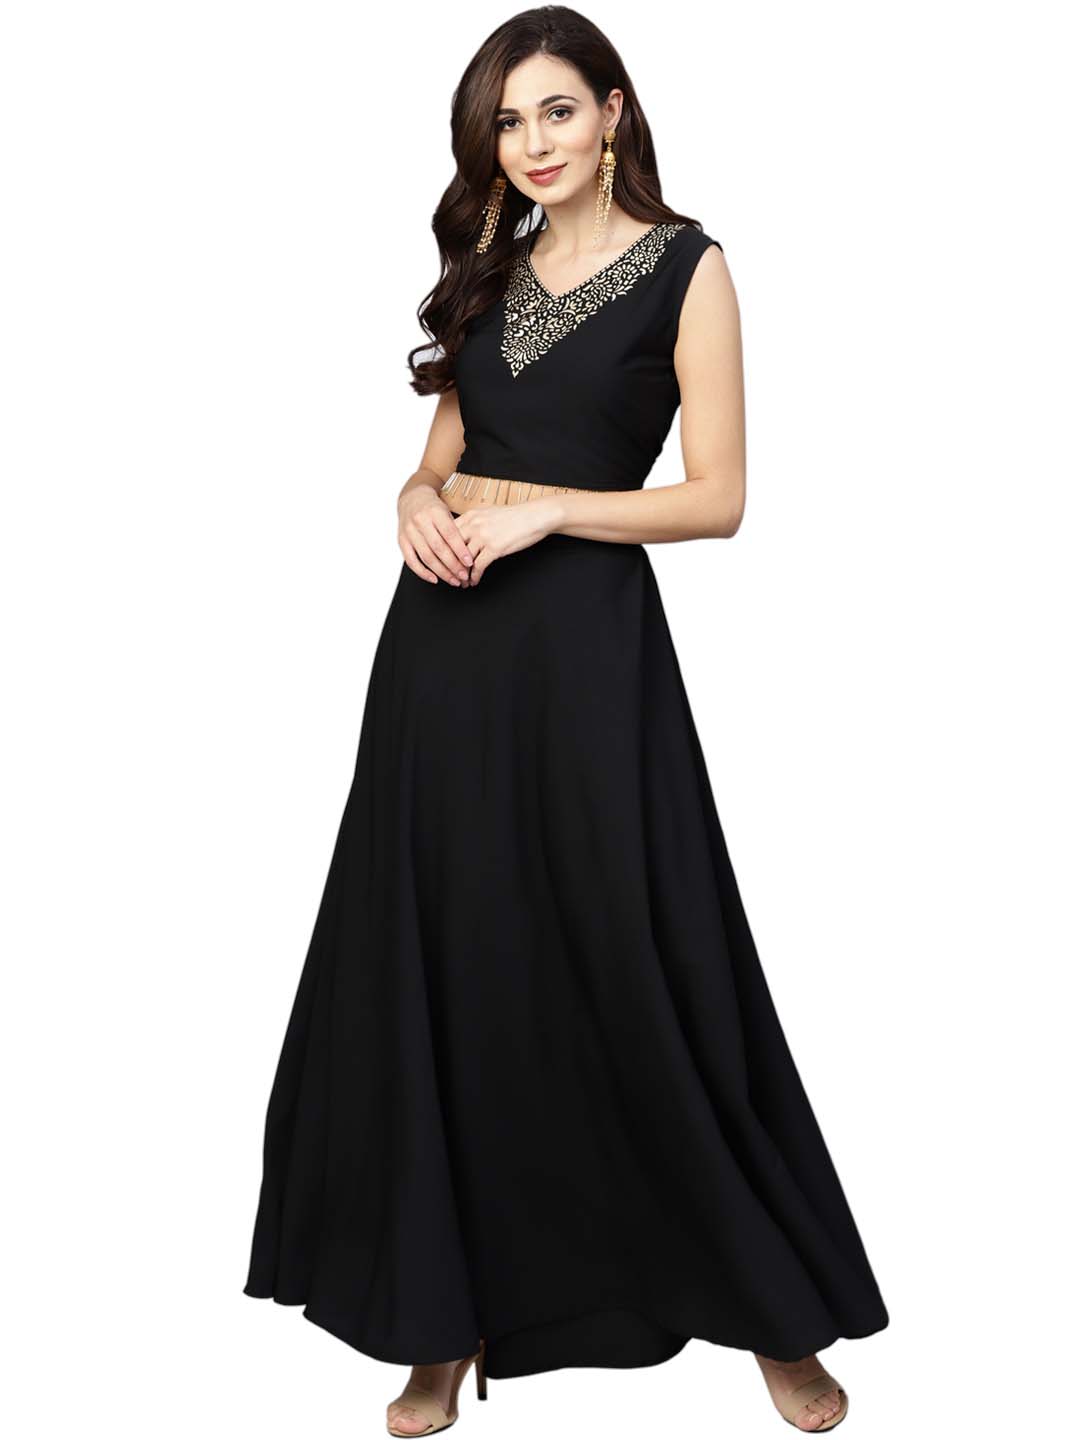 LZF089 Bead Crystal Sleeveless Long Black Evening Dresses With Bead Jacket  Two piece Mother Of The Bride Dress